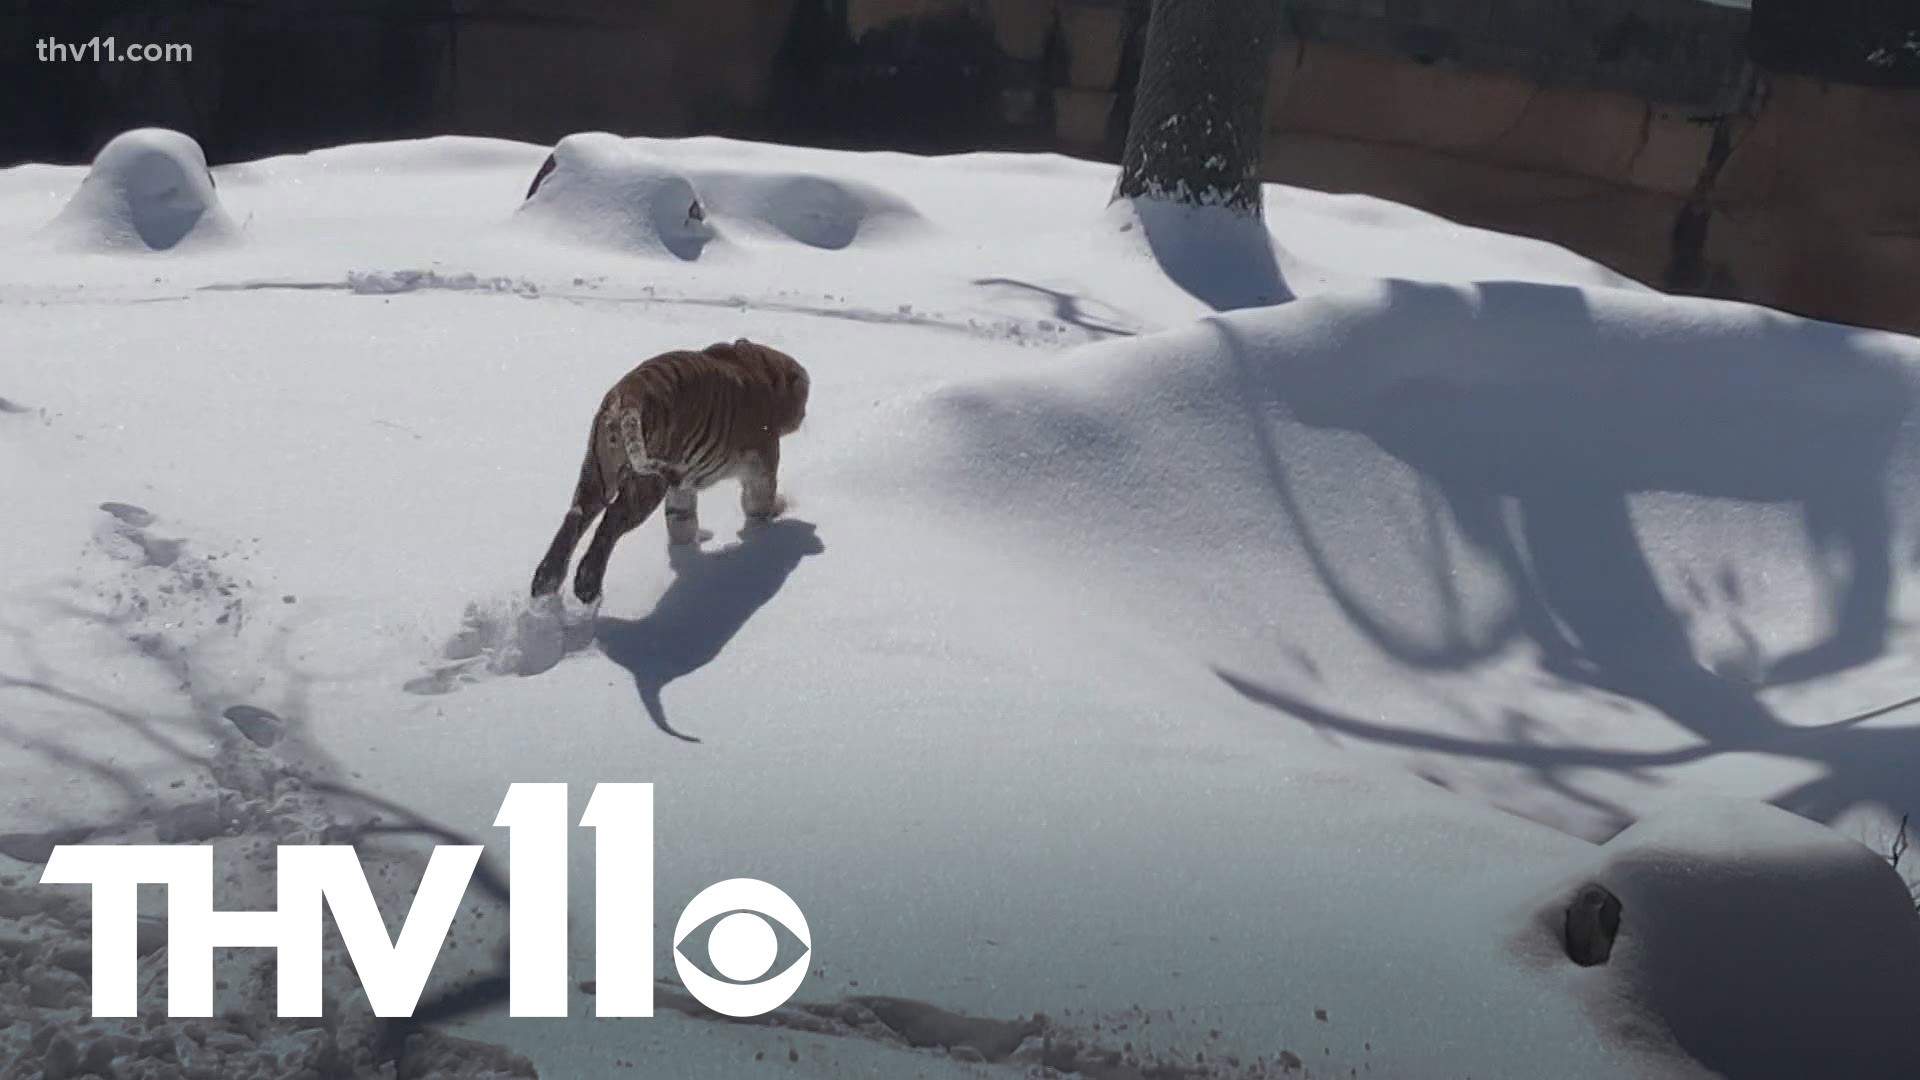 Liku The Tiger Has Snow Day Fun At The Little Rock Zoo Thv11 Com